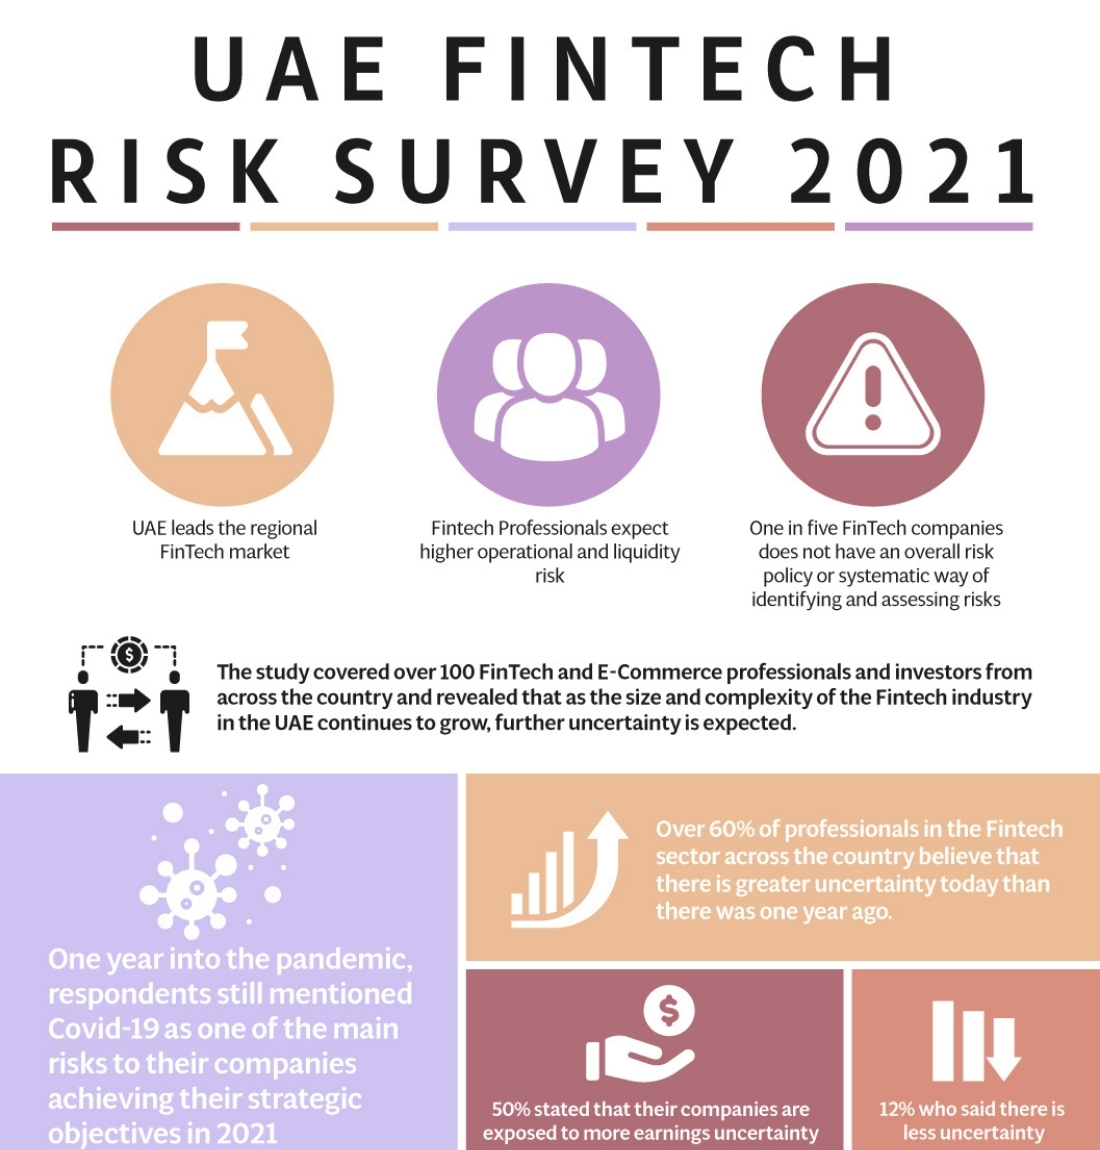 Fintech Companies Place Trust in UAE’s Financial and Legal Infrastructure, but COVID-19 Remains a Significant Risk Factor – Várri Consultancy’s “UAE FinTech Survey 2021” Results Revealed